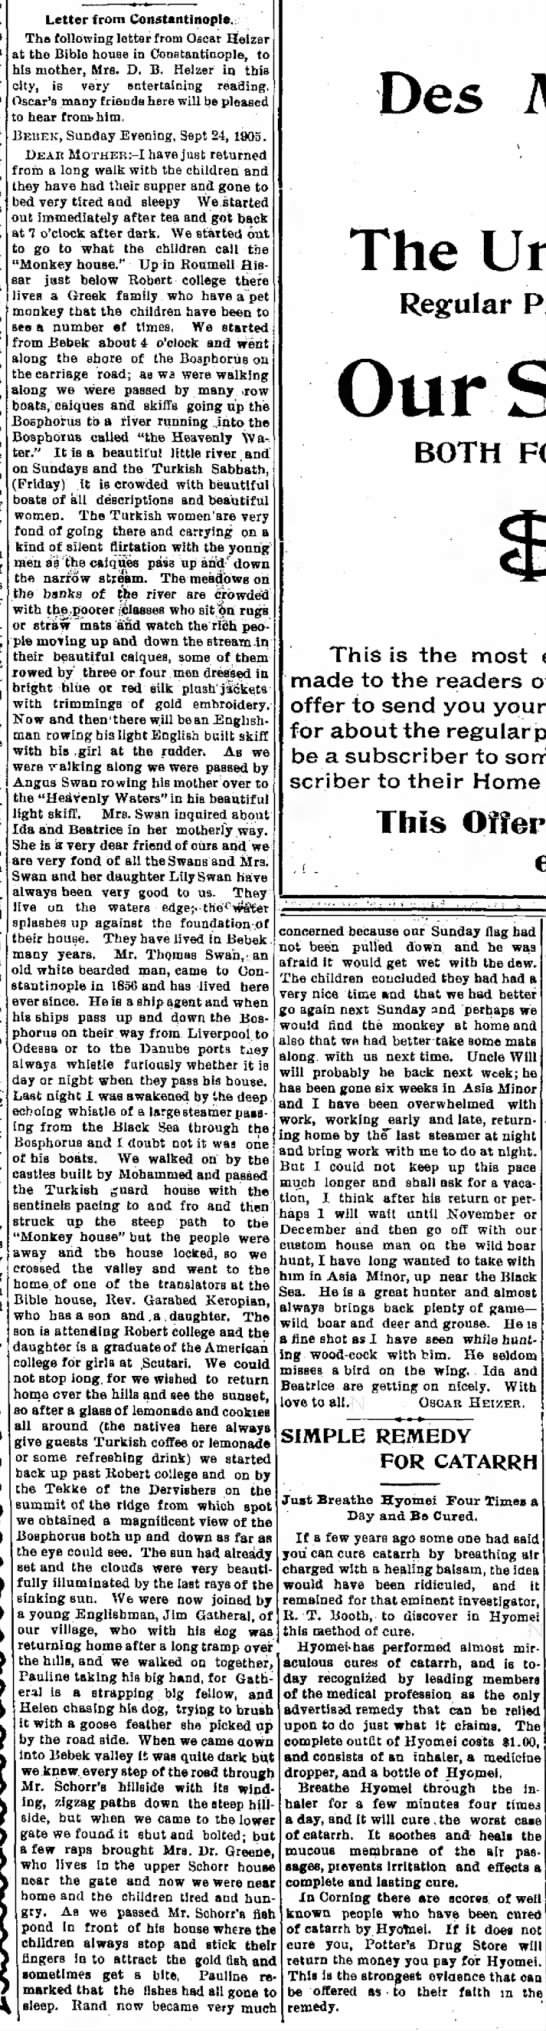 Article about Oscar Heizer Adams County Free Press Oct 18 1905 - 